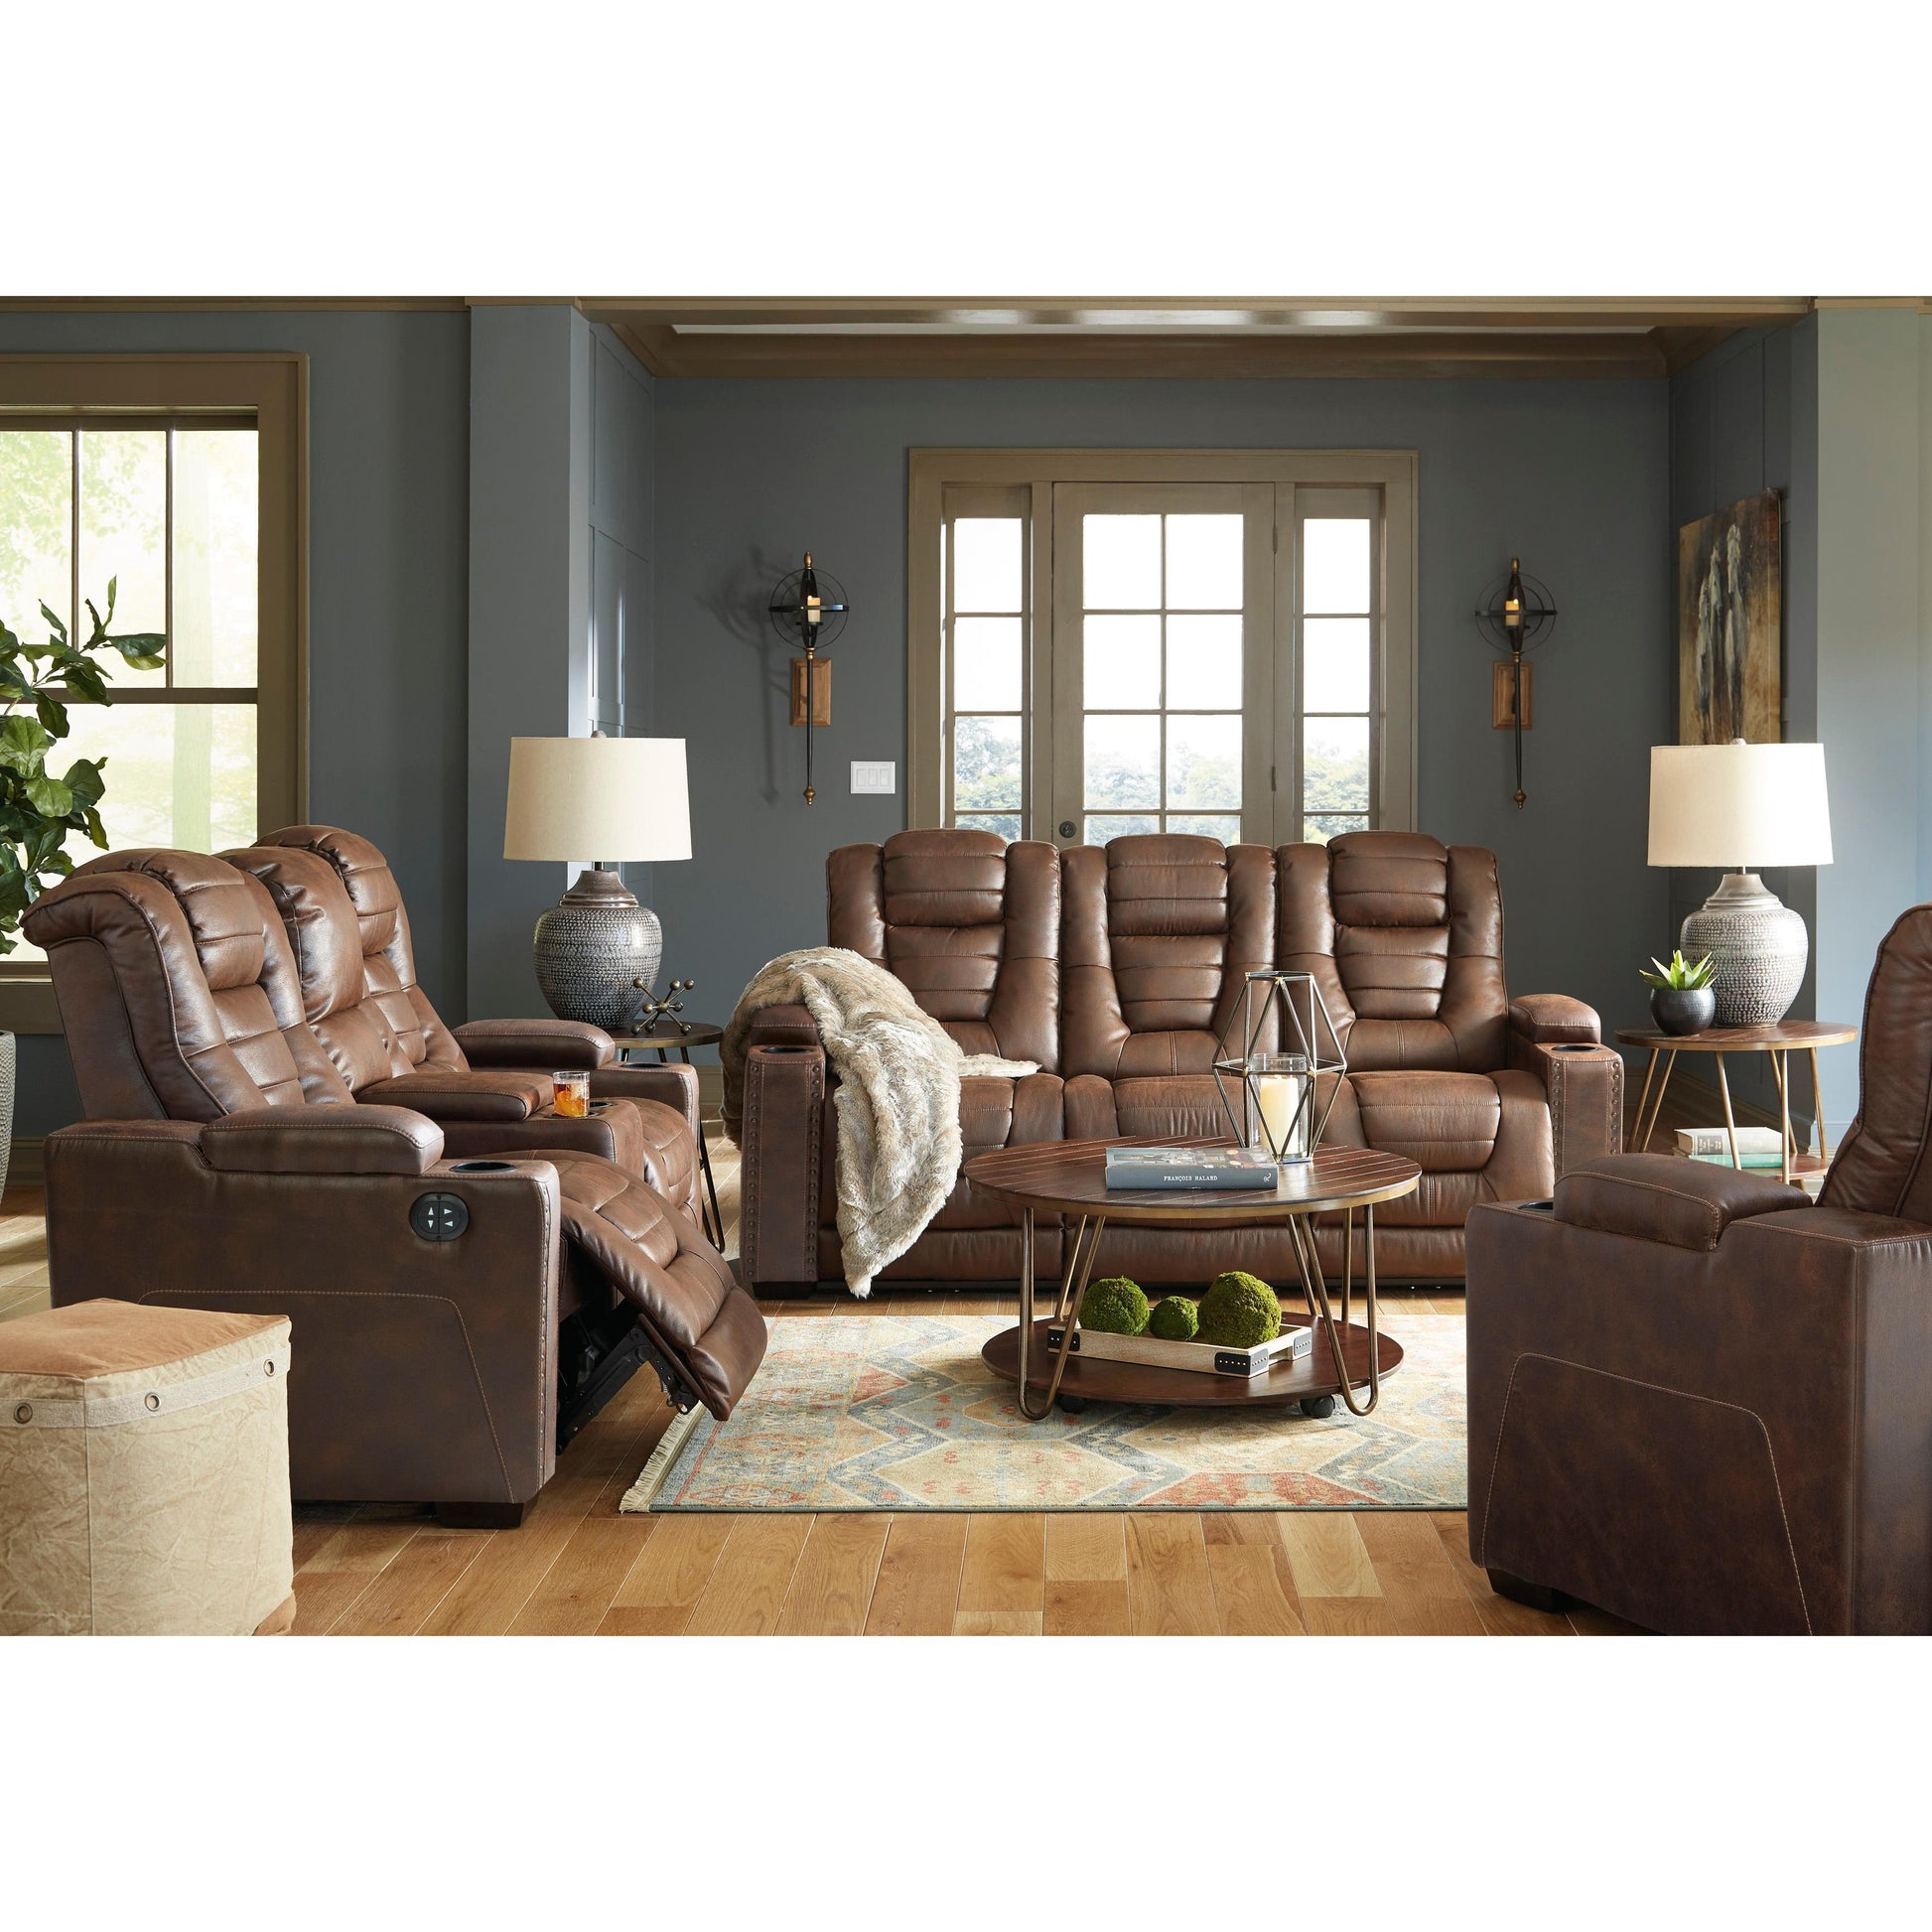 Signature Design by Ashley Owner's Box 24505U3 2 pc Power Reclining Living Room Set IMAGE 1